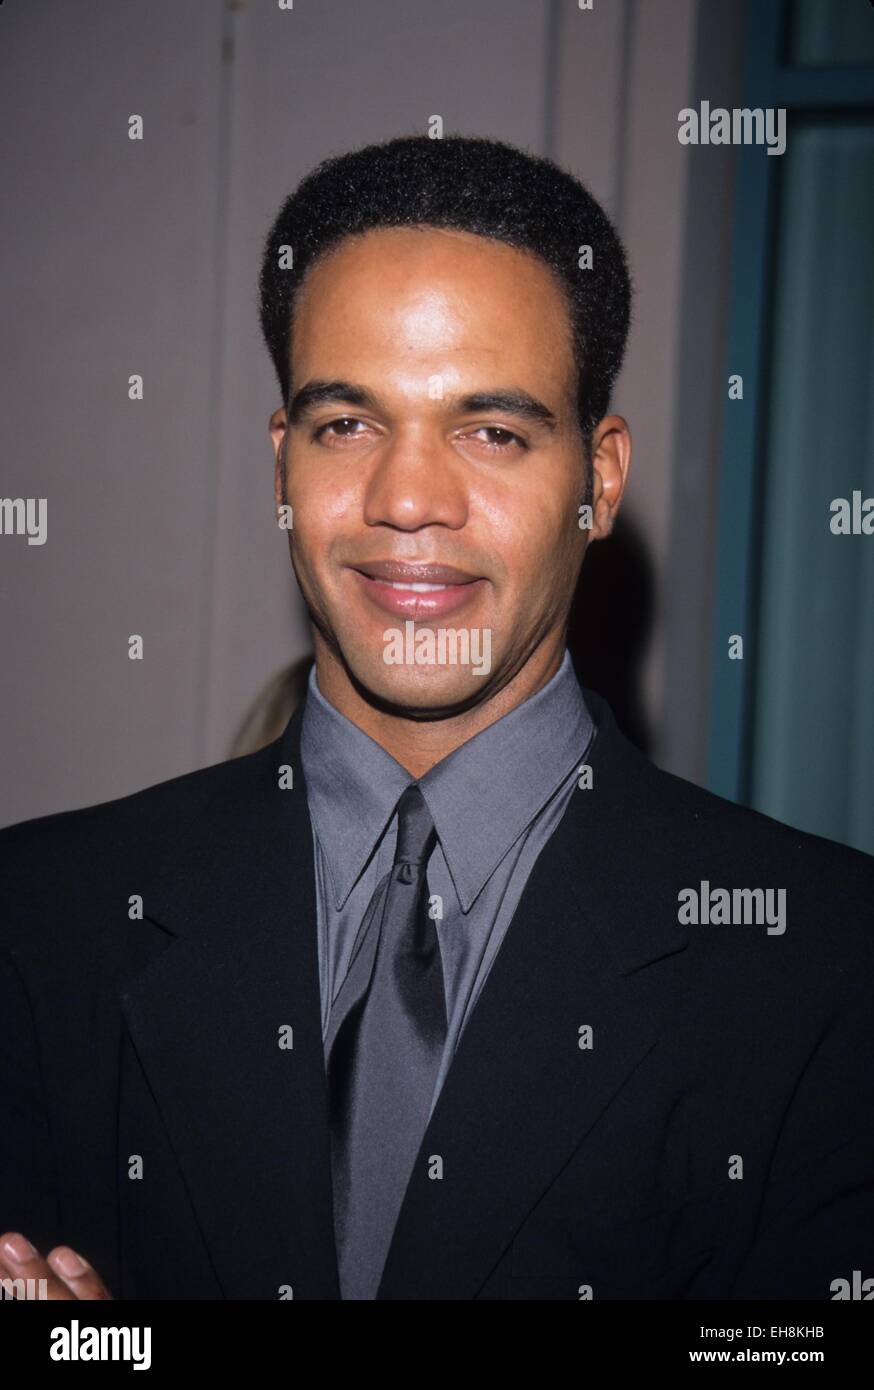 KRISTOFF ST. JOHN at An Evening with William Bell Academy of TV and Arts in Los Angeles 1999.k16868tr. © Tom Rodriguez/Globe Photos/ZUMA Wire/Alamy Live News Stock Photo